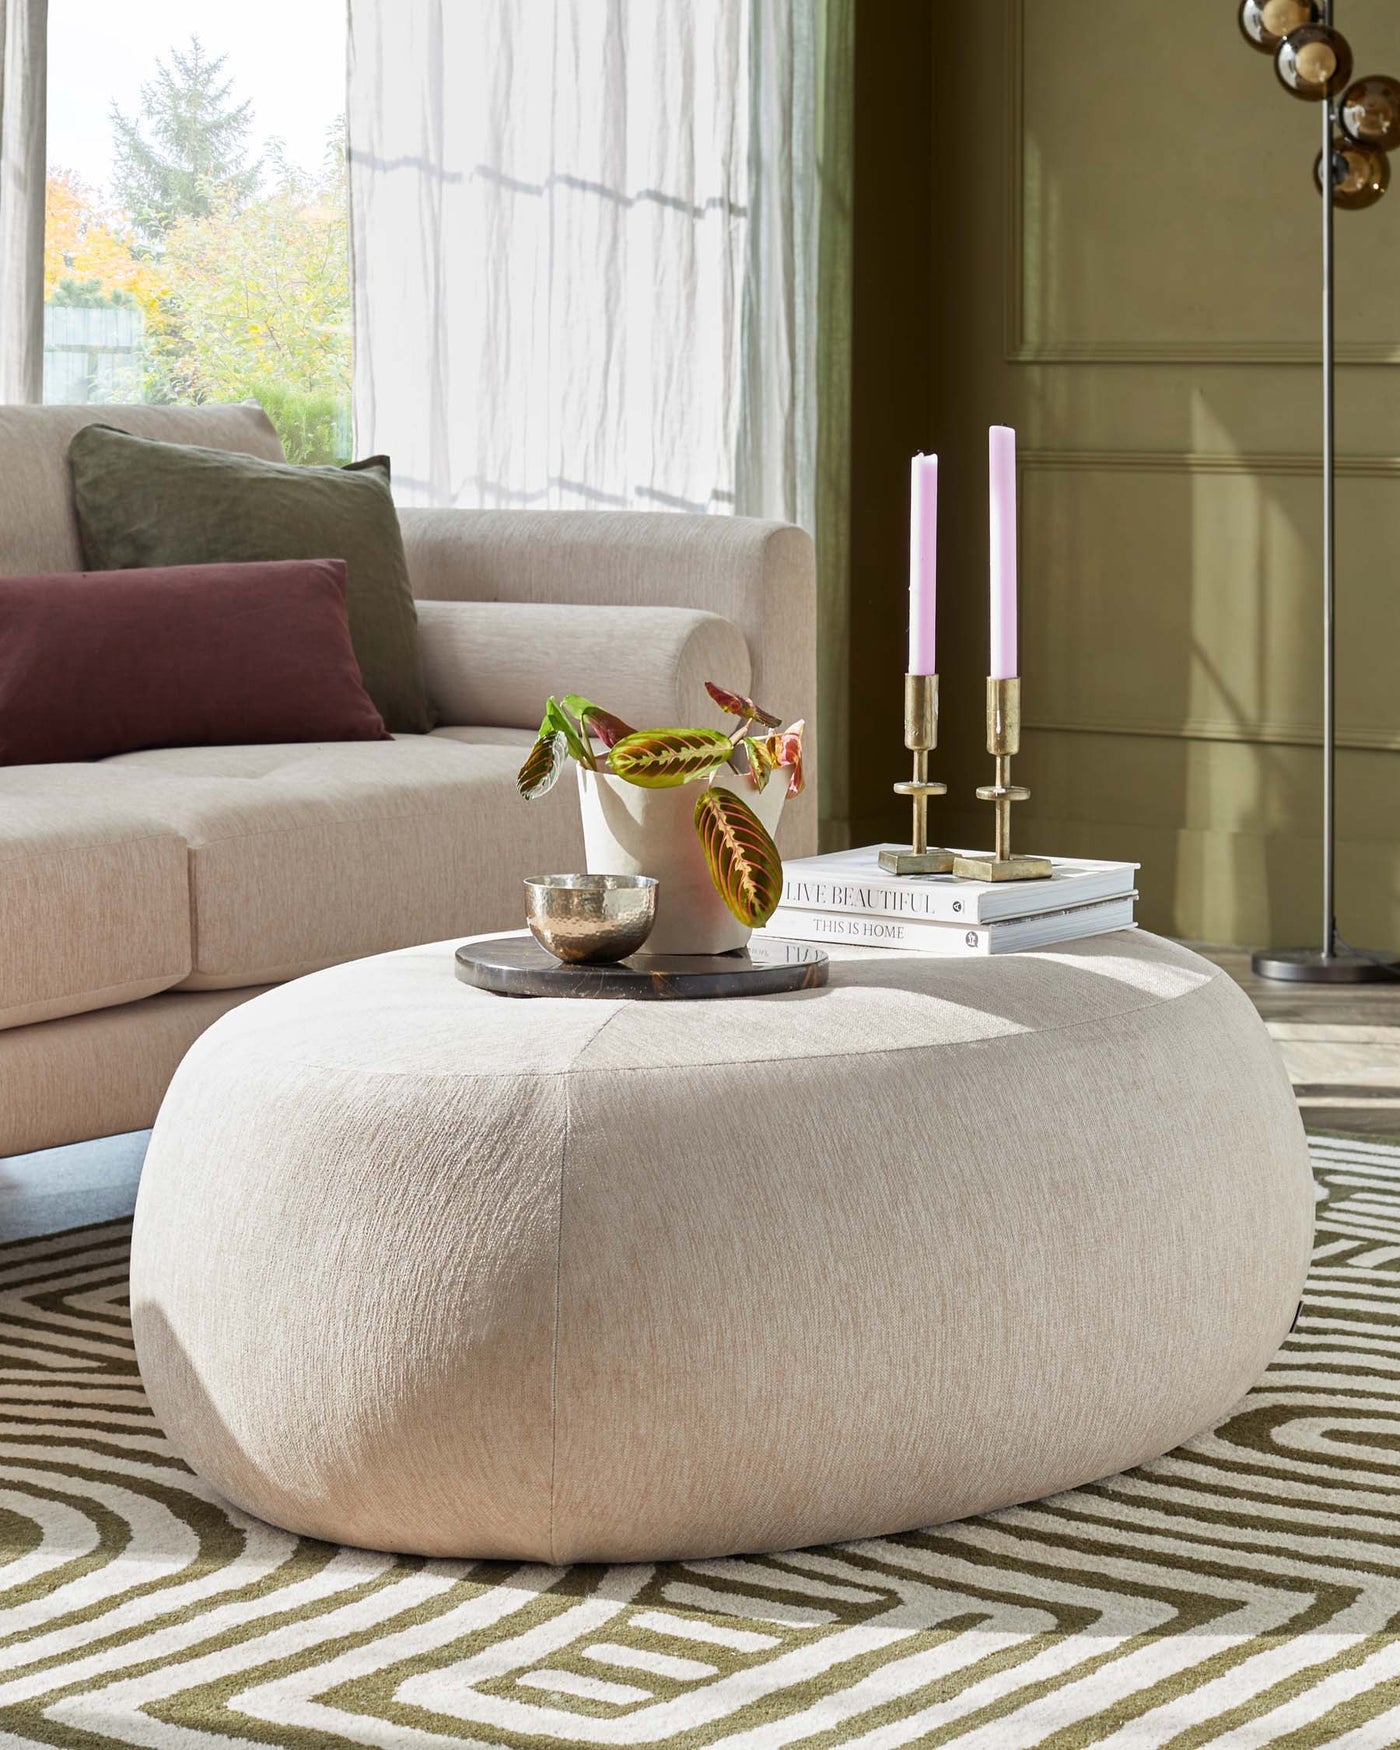 Round beige fabric ottoman in a contemporary living space, with a soft texture and a versatile design suitable for seating or as a coffee table alternative.